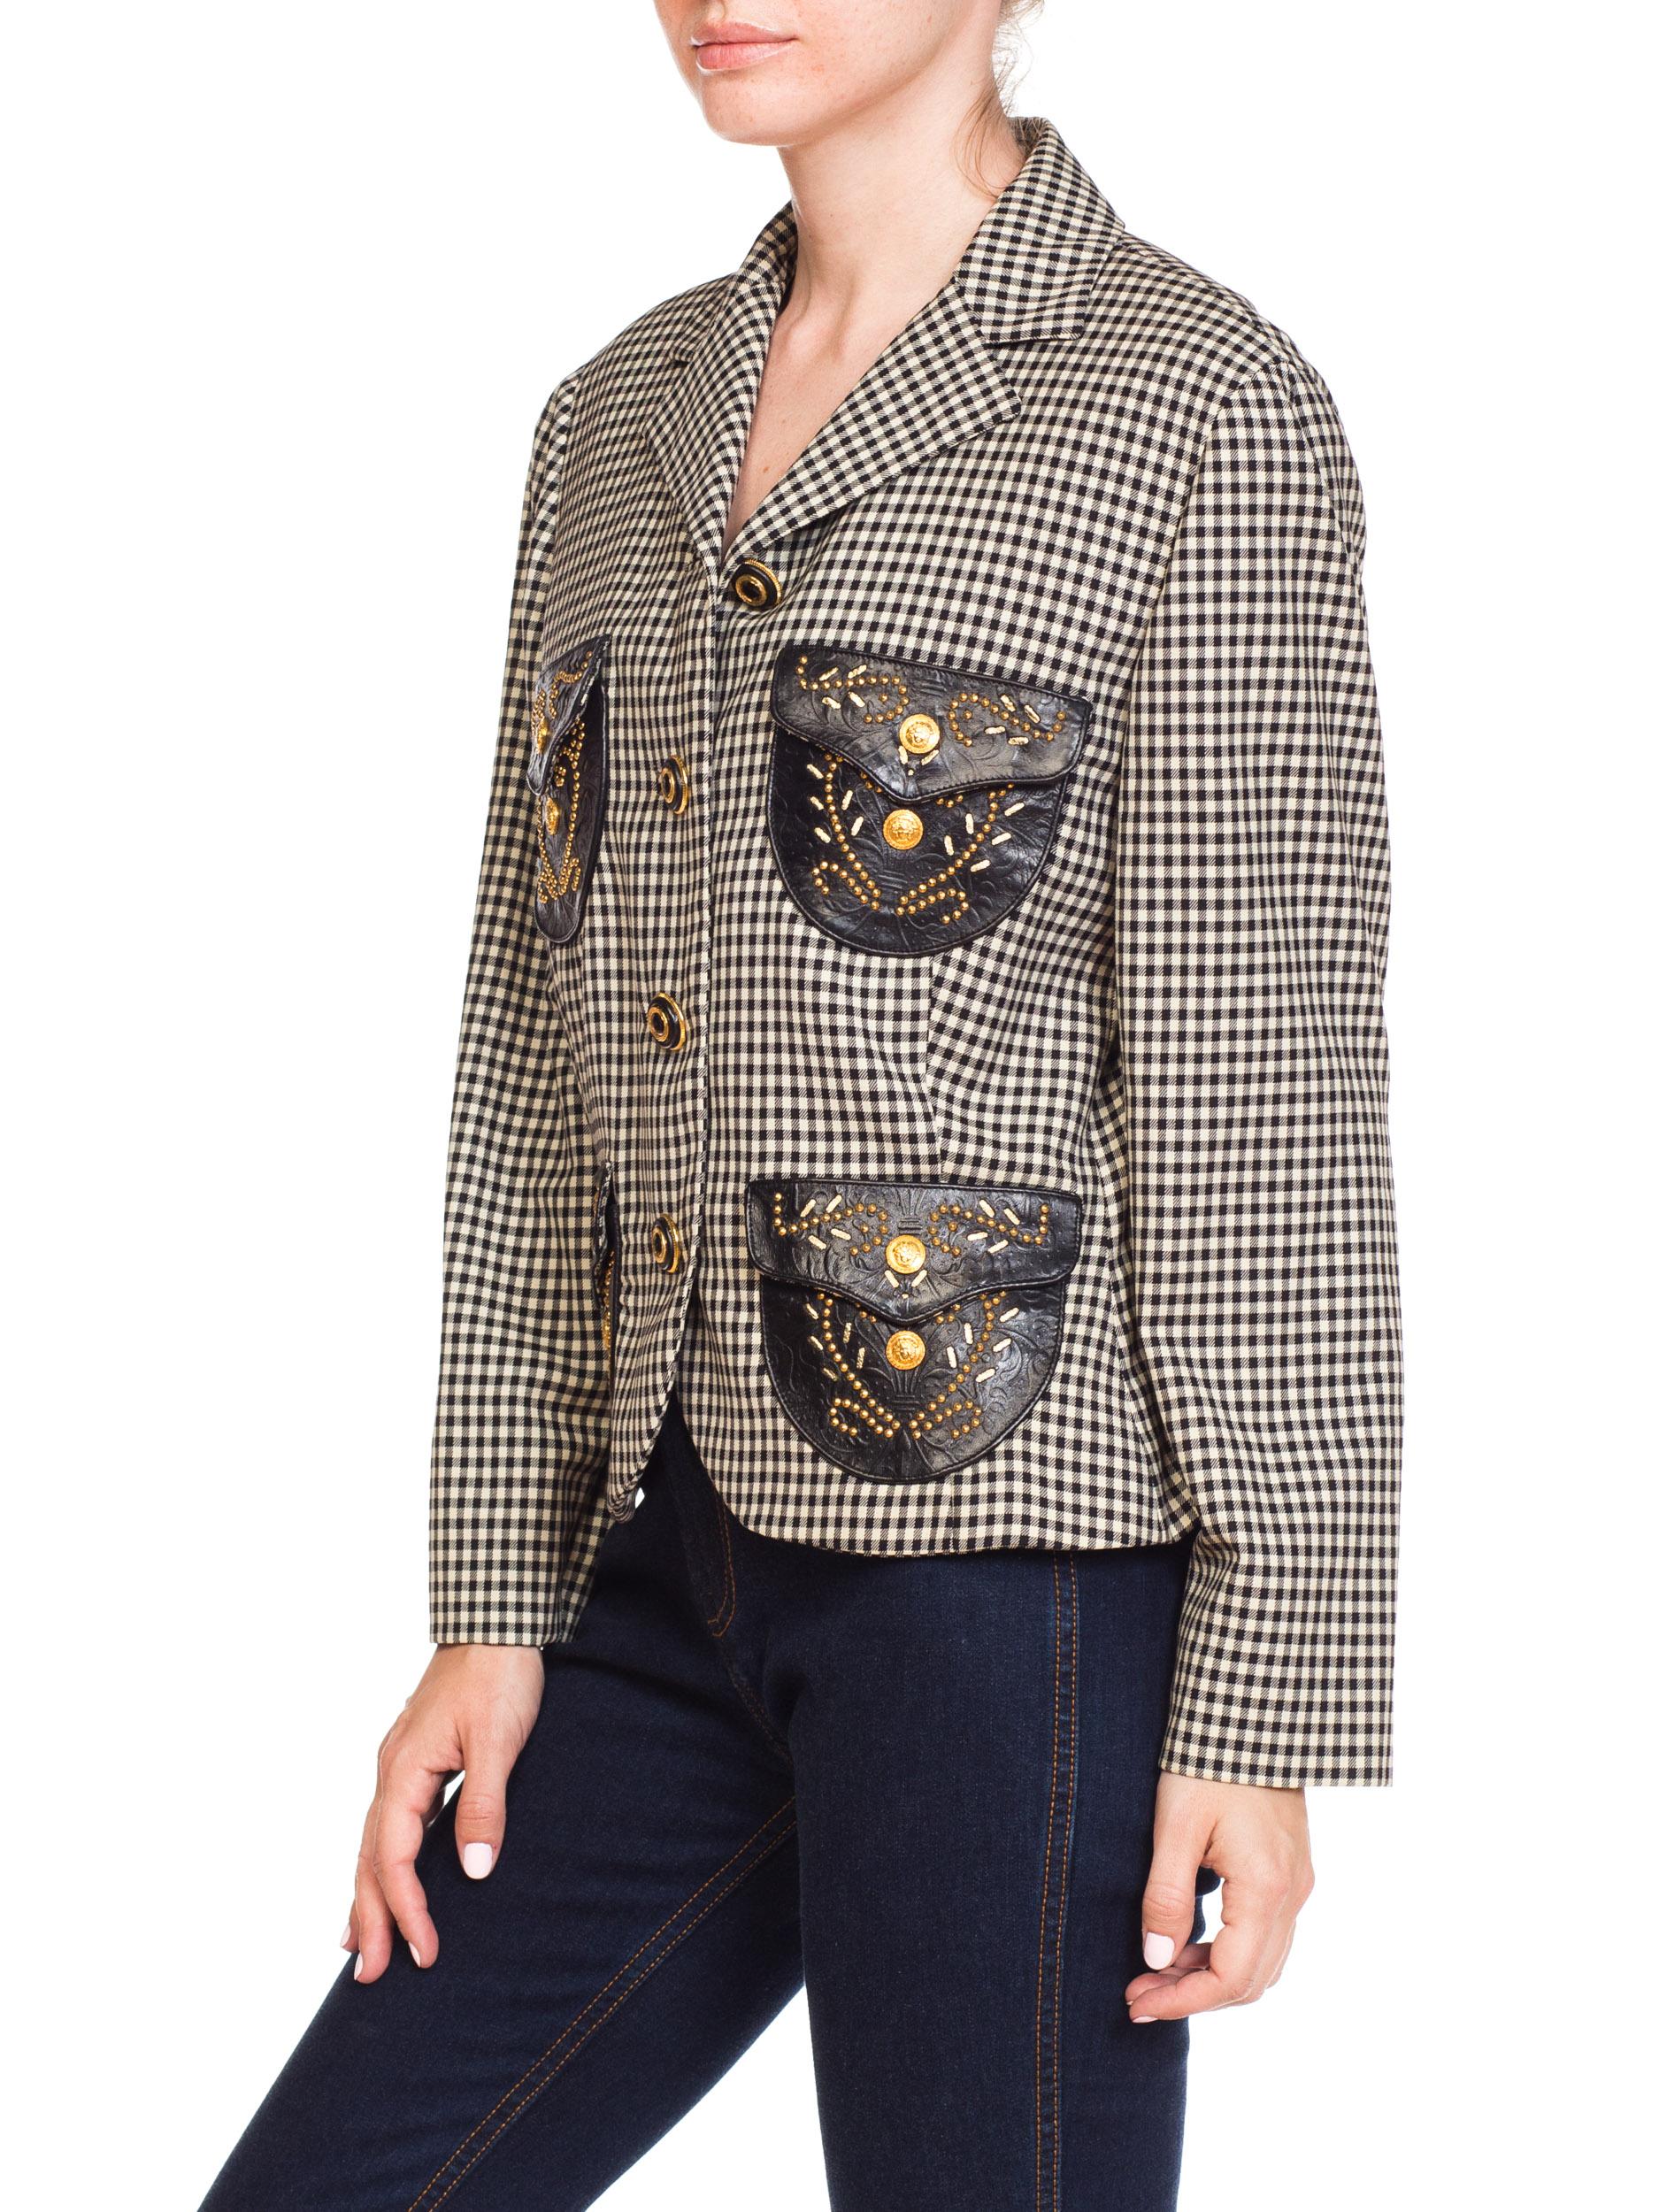 1990S GIANNI VERSACE Western Collection Jacket With Gold Stud & Leather Details 3